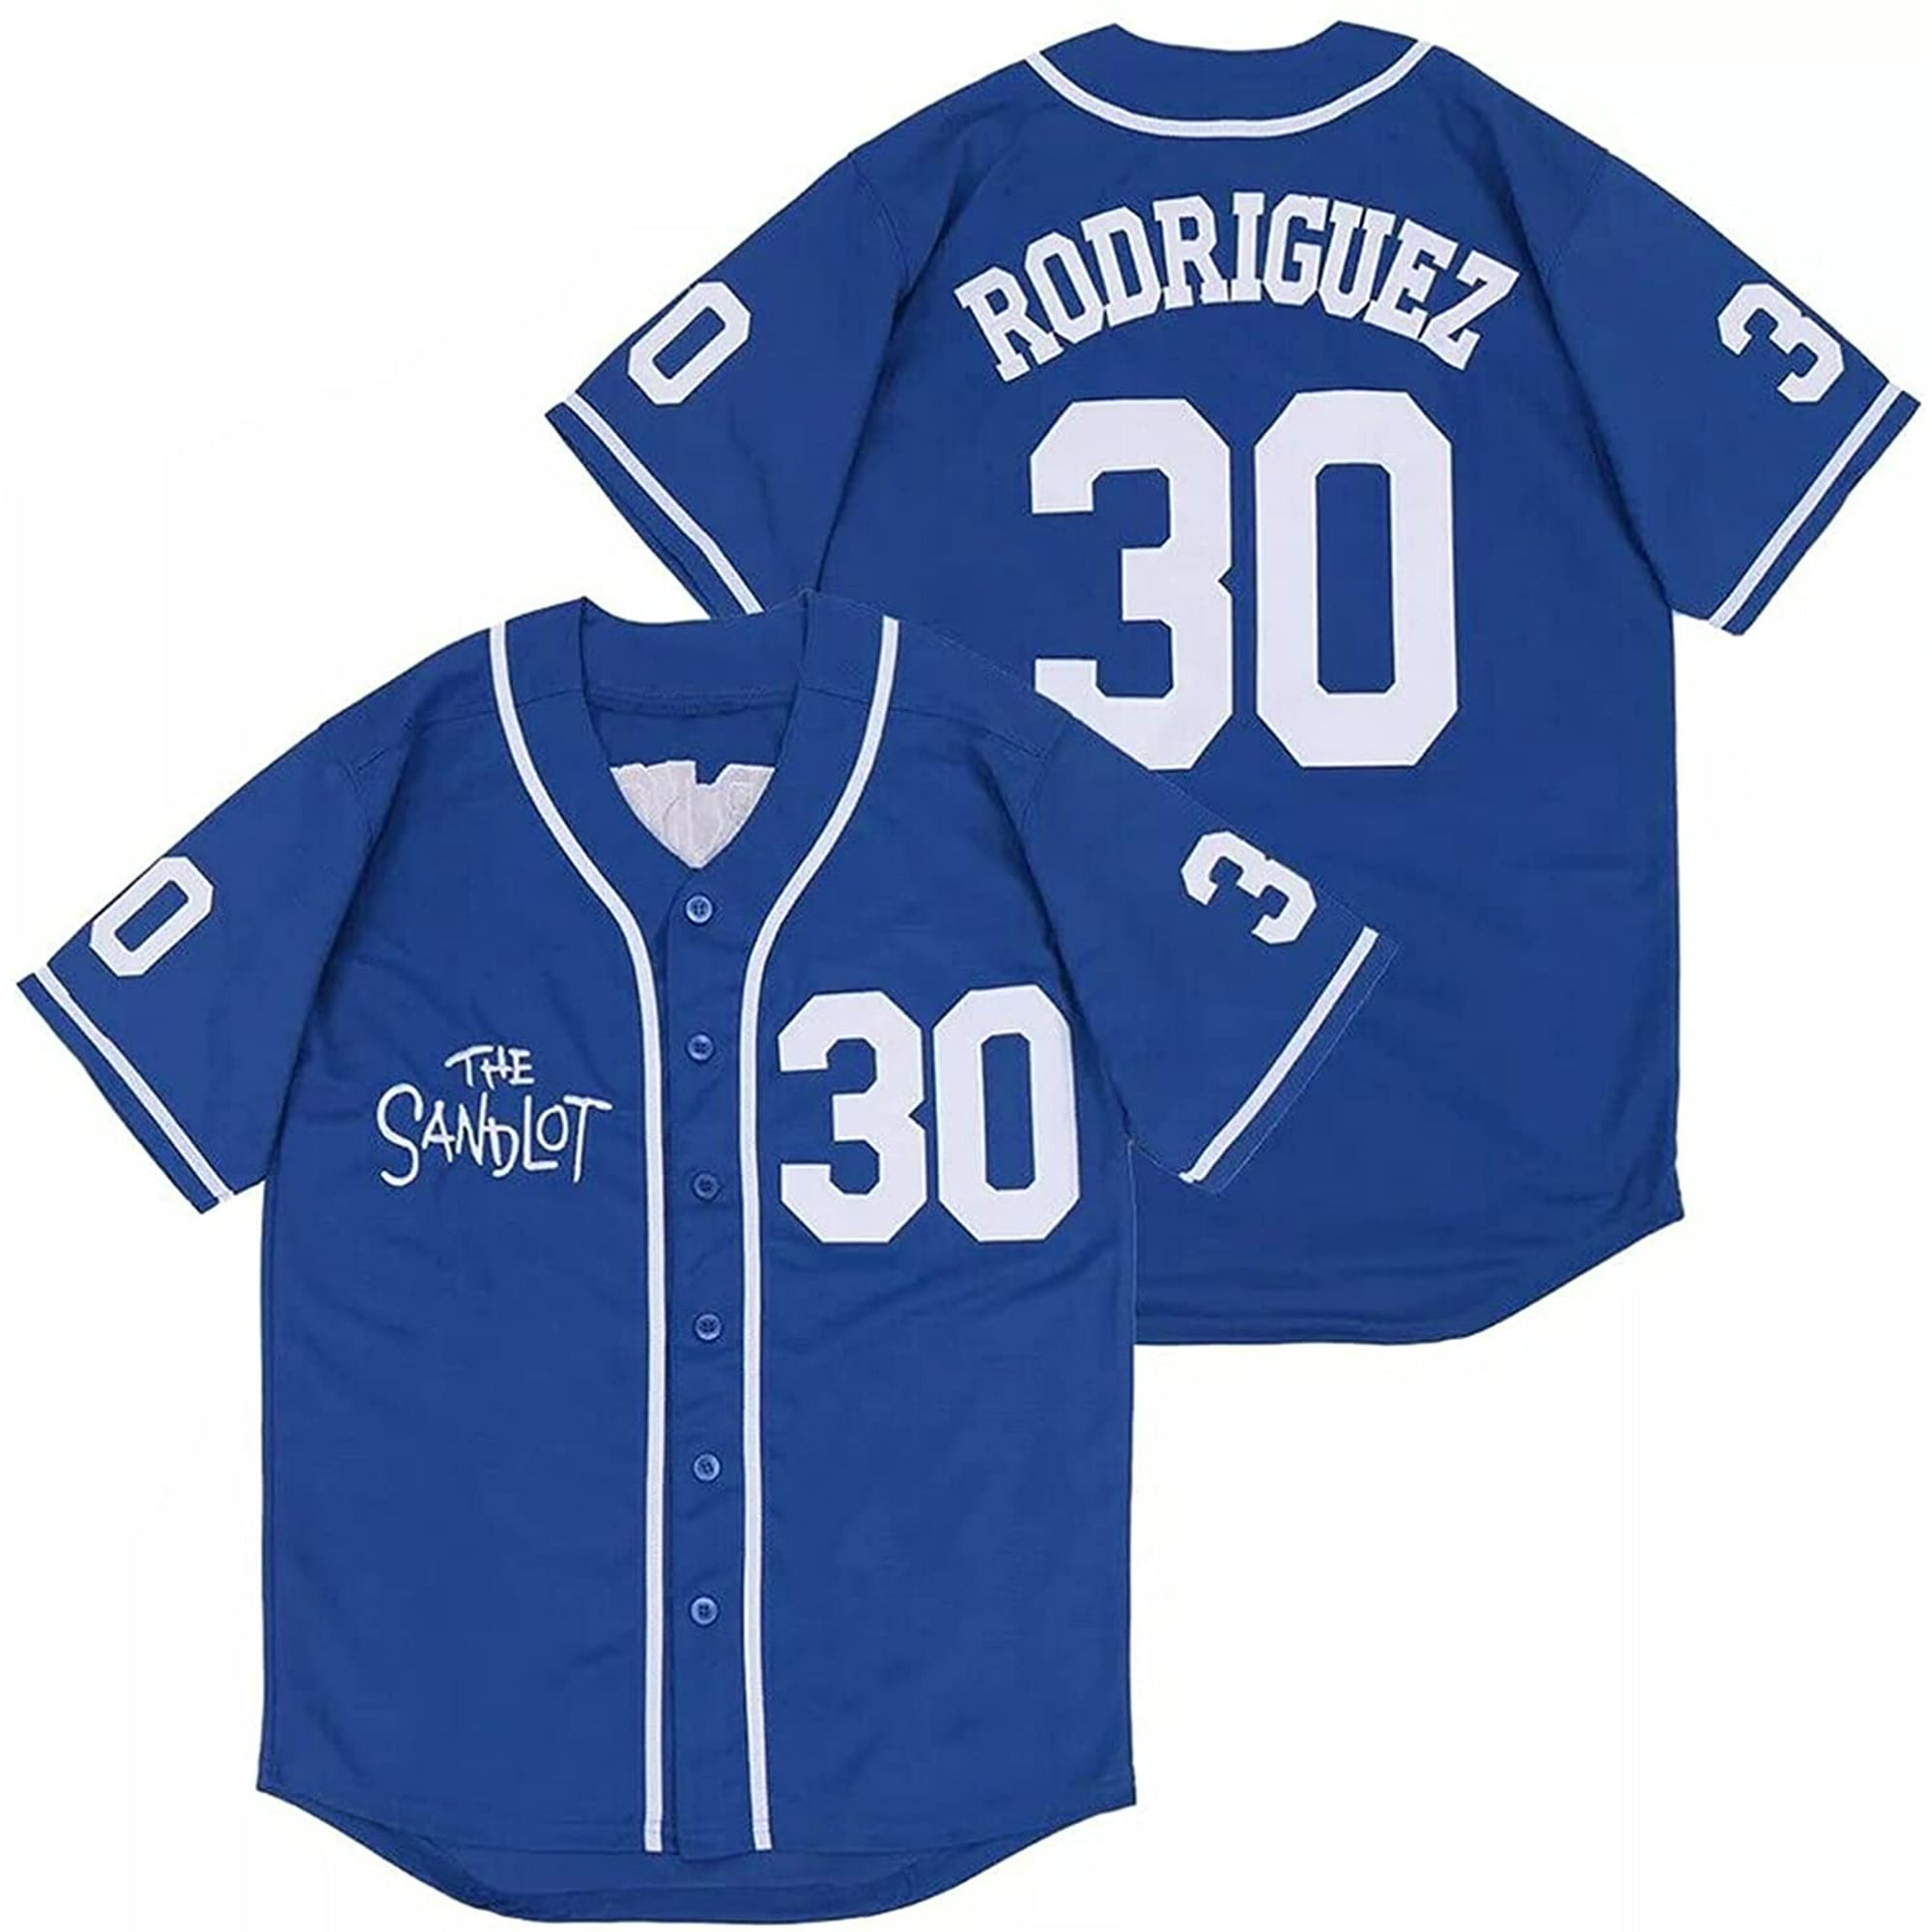 Buy Benny The Jet Rodriguez Youth Jersey